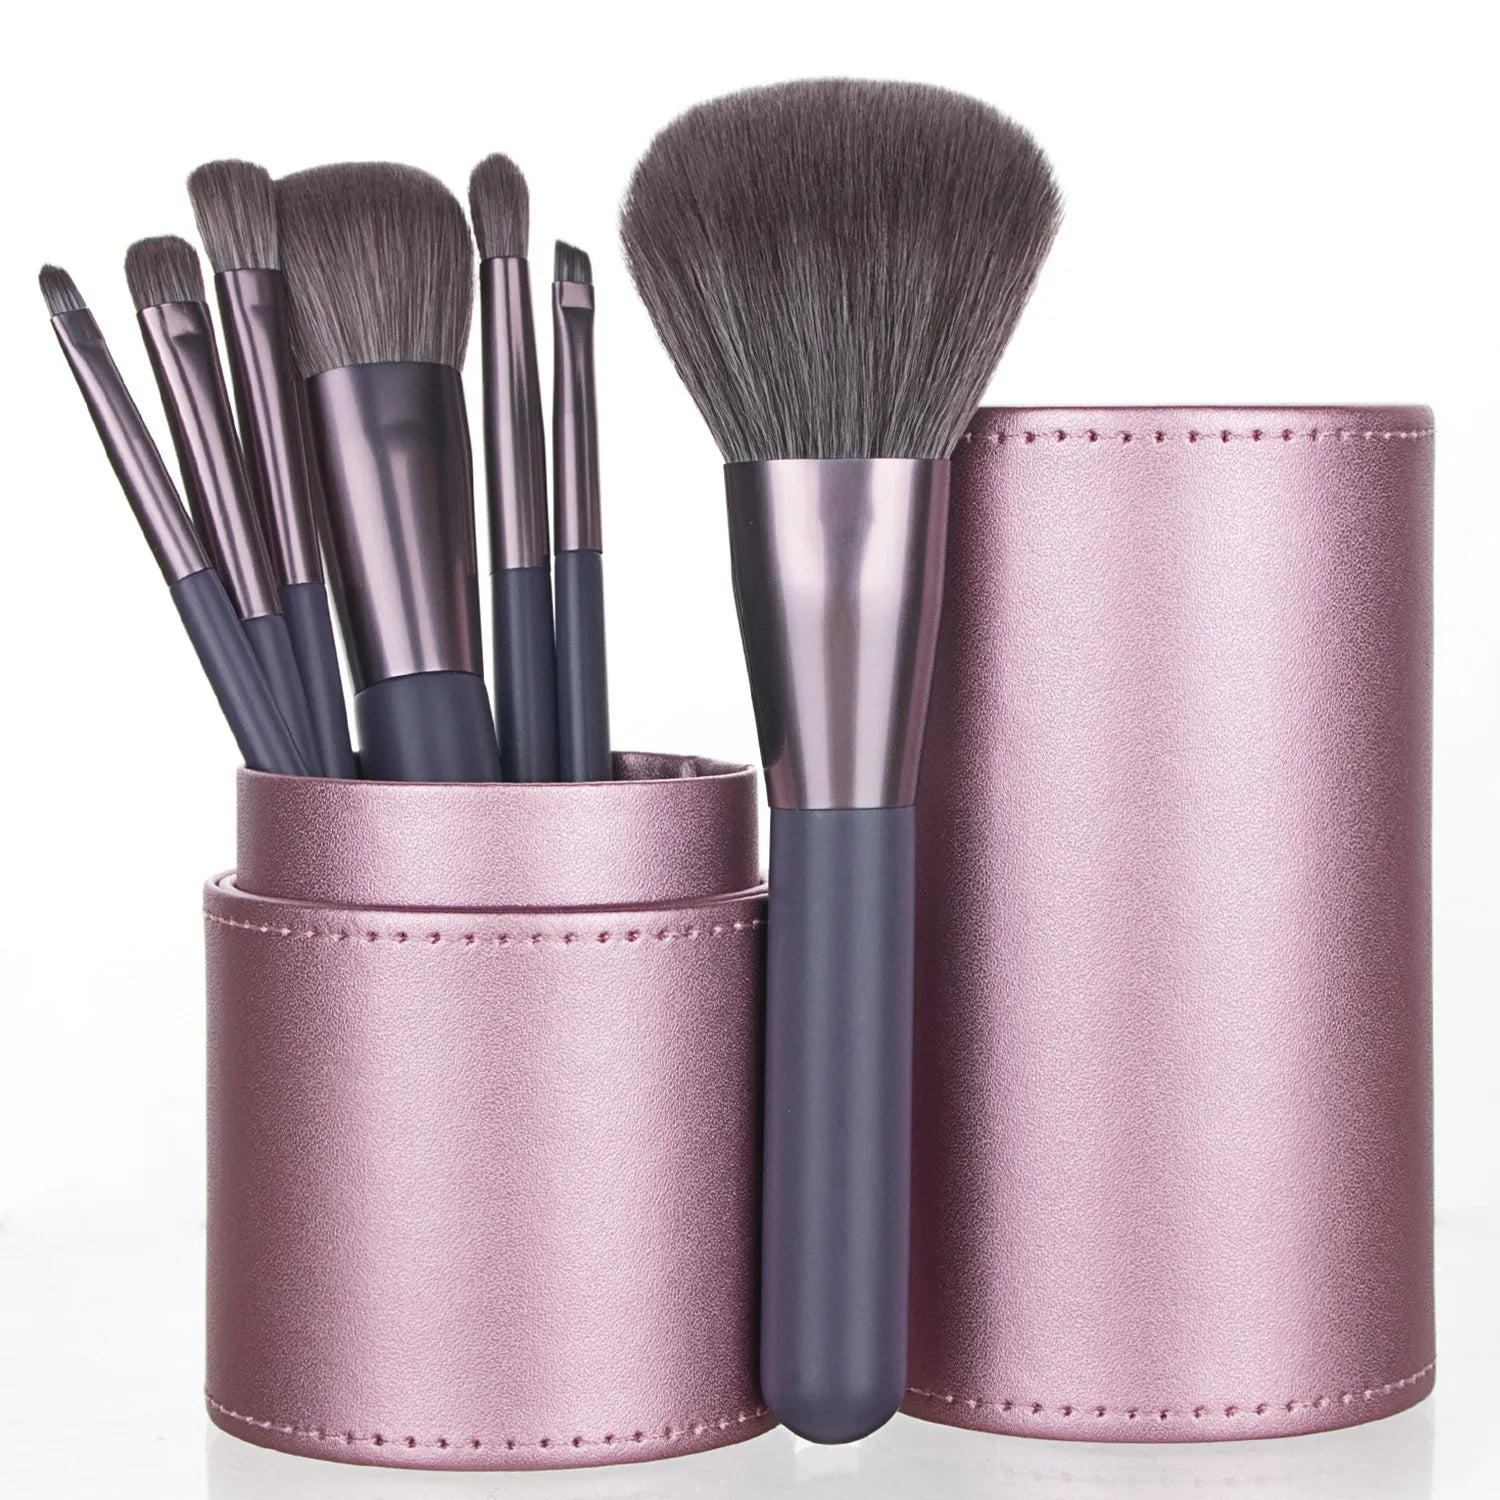 Professional Makeup Brushes Set with Bucket - High-End Beauty Tools